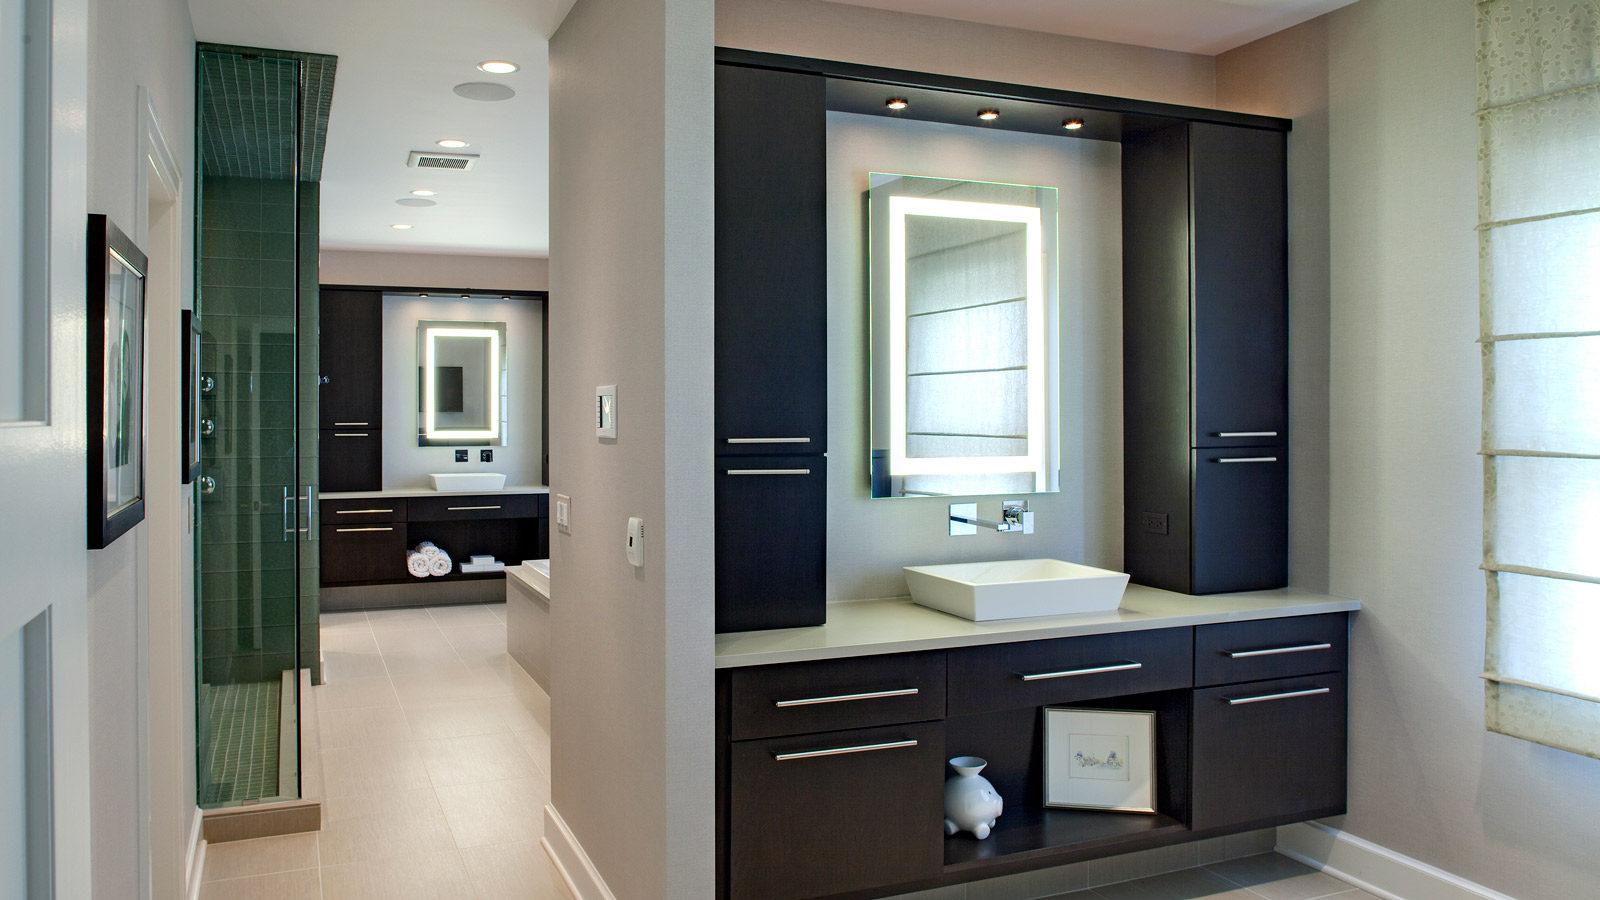 His-and-Hers-Contemporary-Master-Bathroom-drury-design